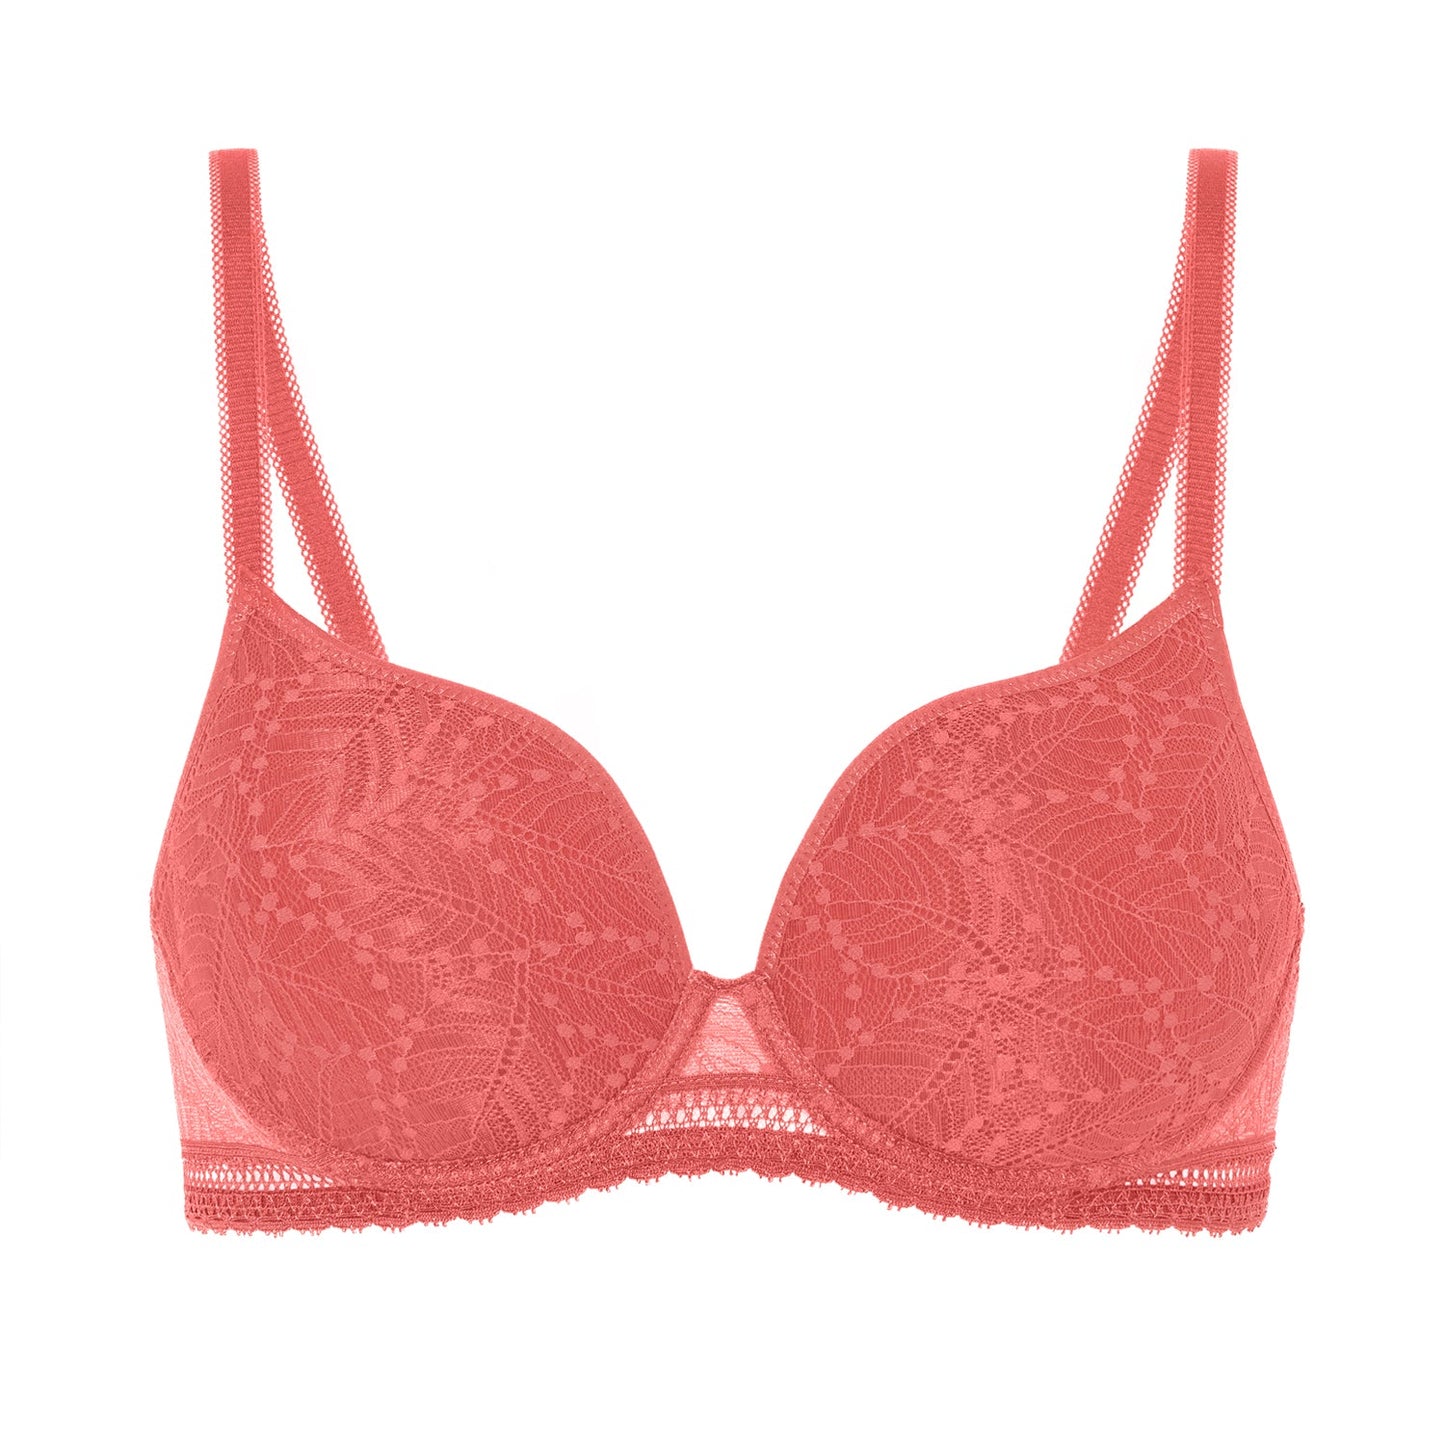 Comete Spacer Bra - Pinned Up Bra Lounge